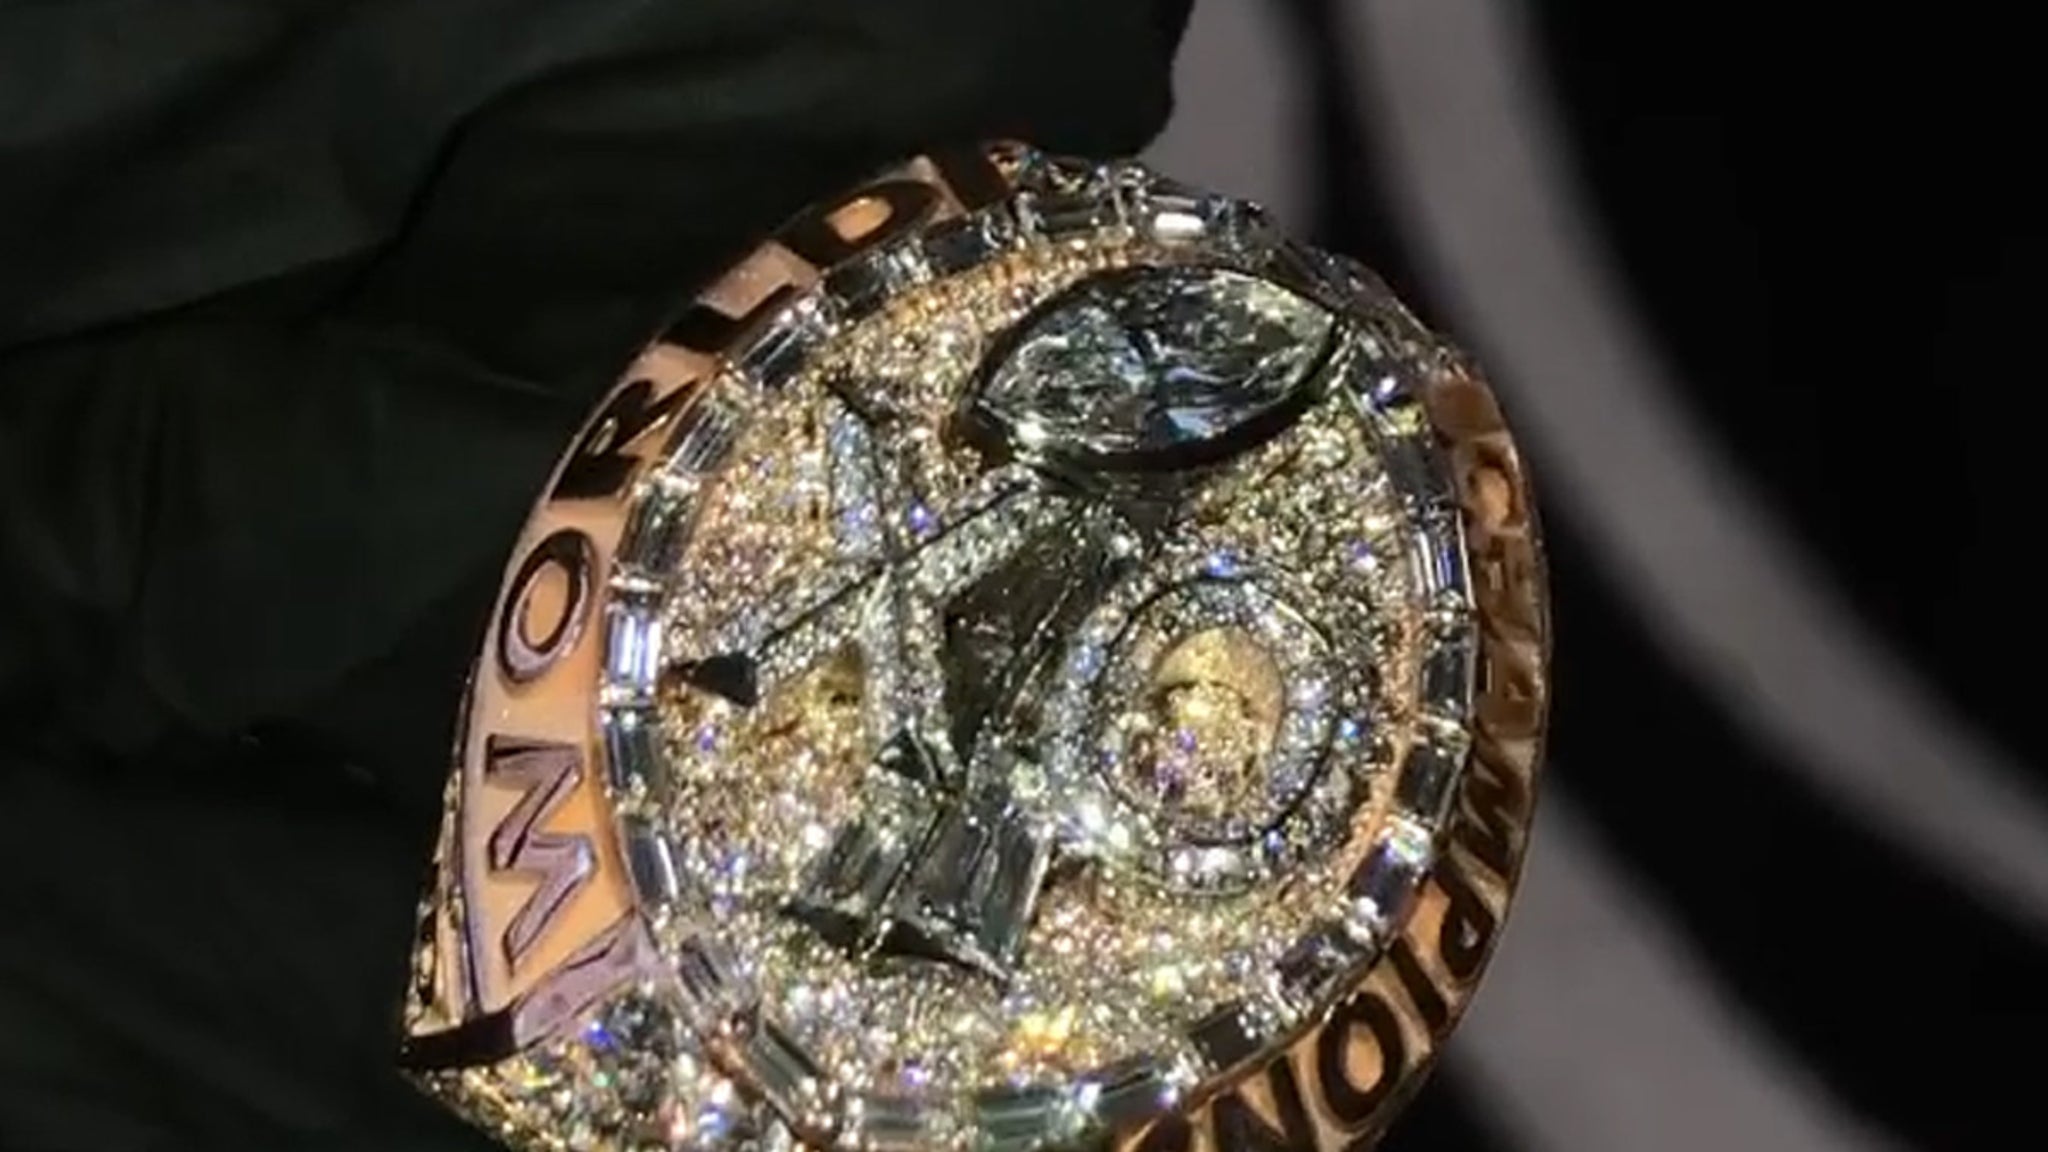 The Weeknd gets a custom diamond Super Bowl ring after the fantastic rest time show